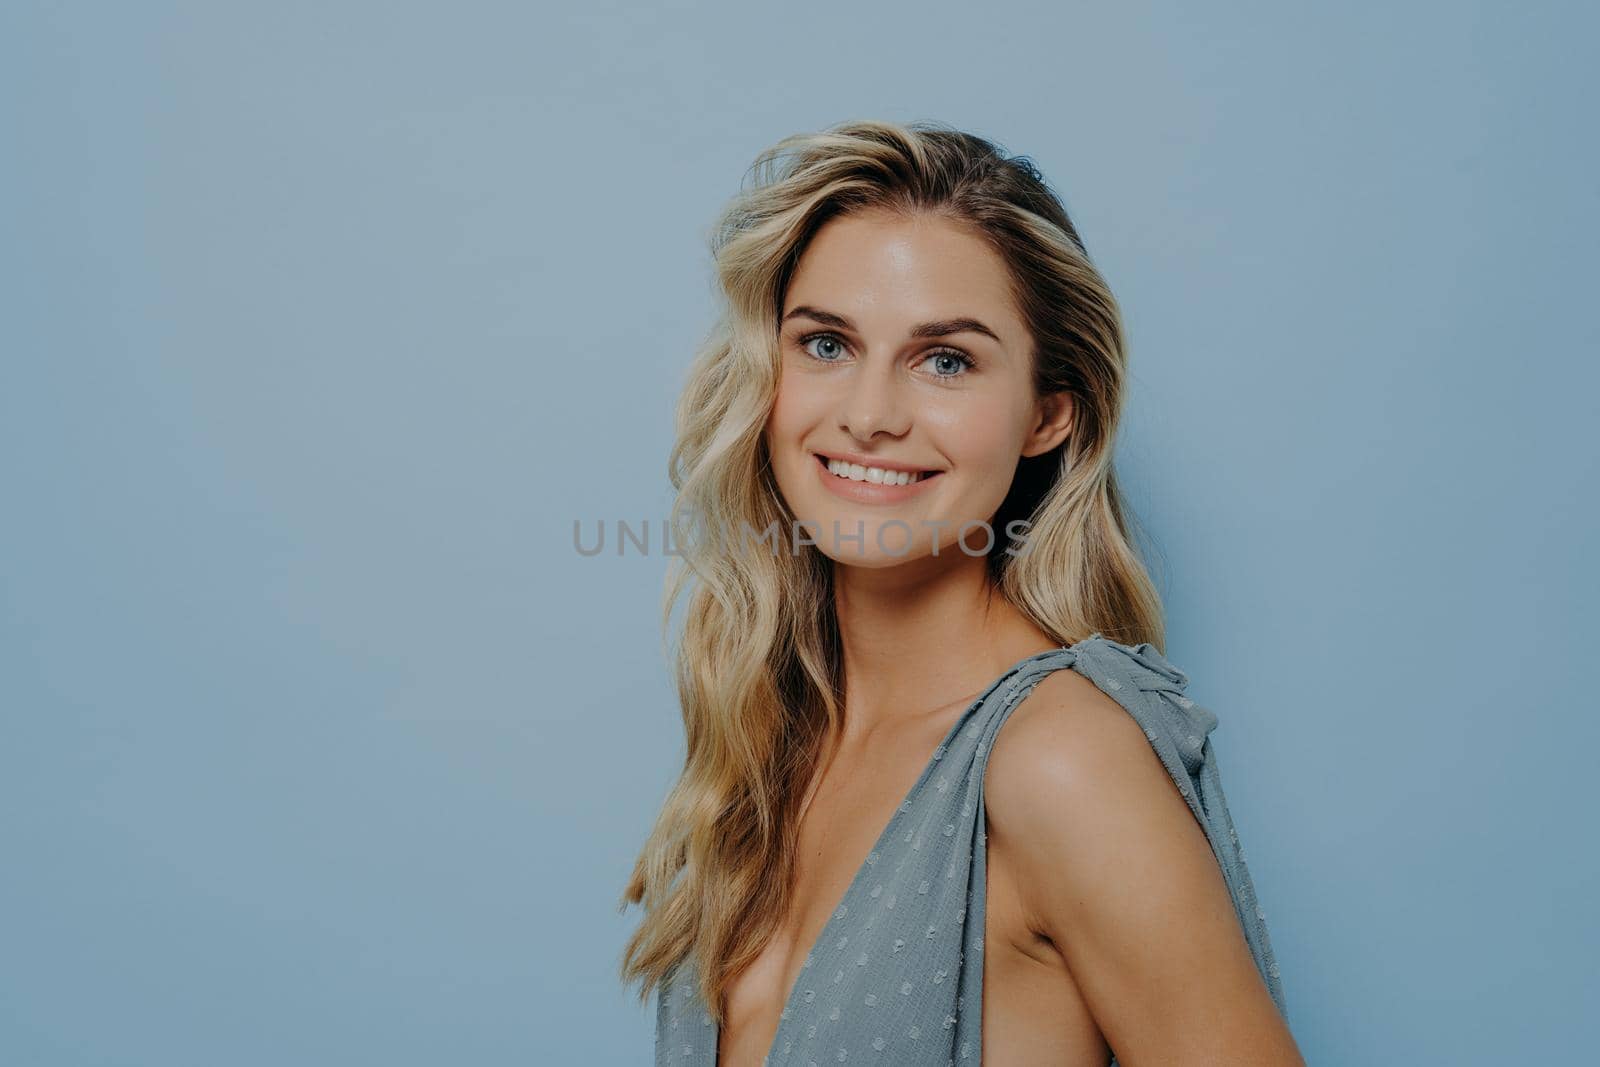 Portrait of cheerful smiling blonde girl dressed in blue dress, standing sideways with toothy smile while looking at camera, calm and relaxed at same time, posing in front of blue background